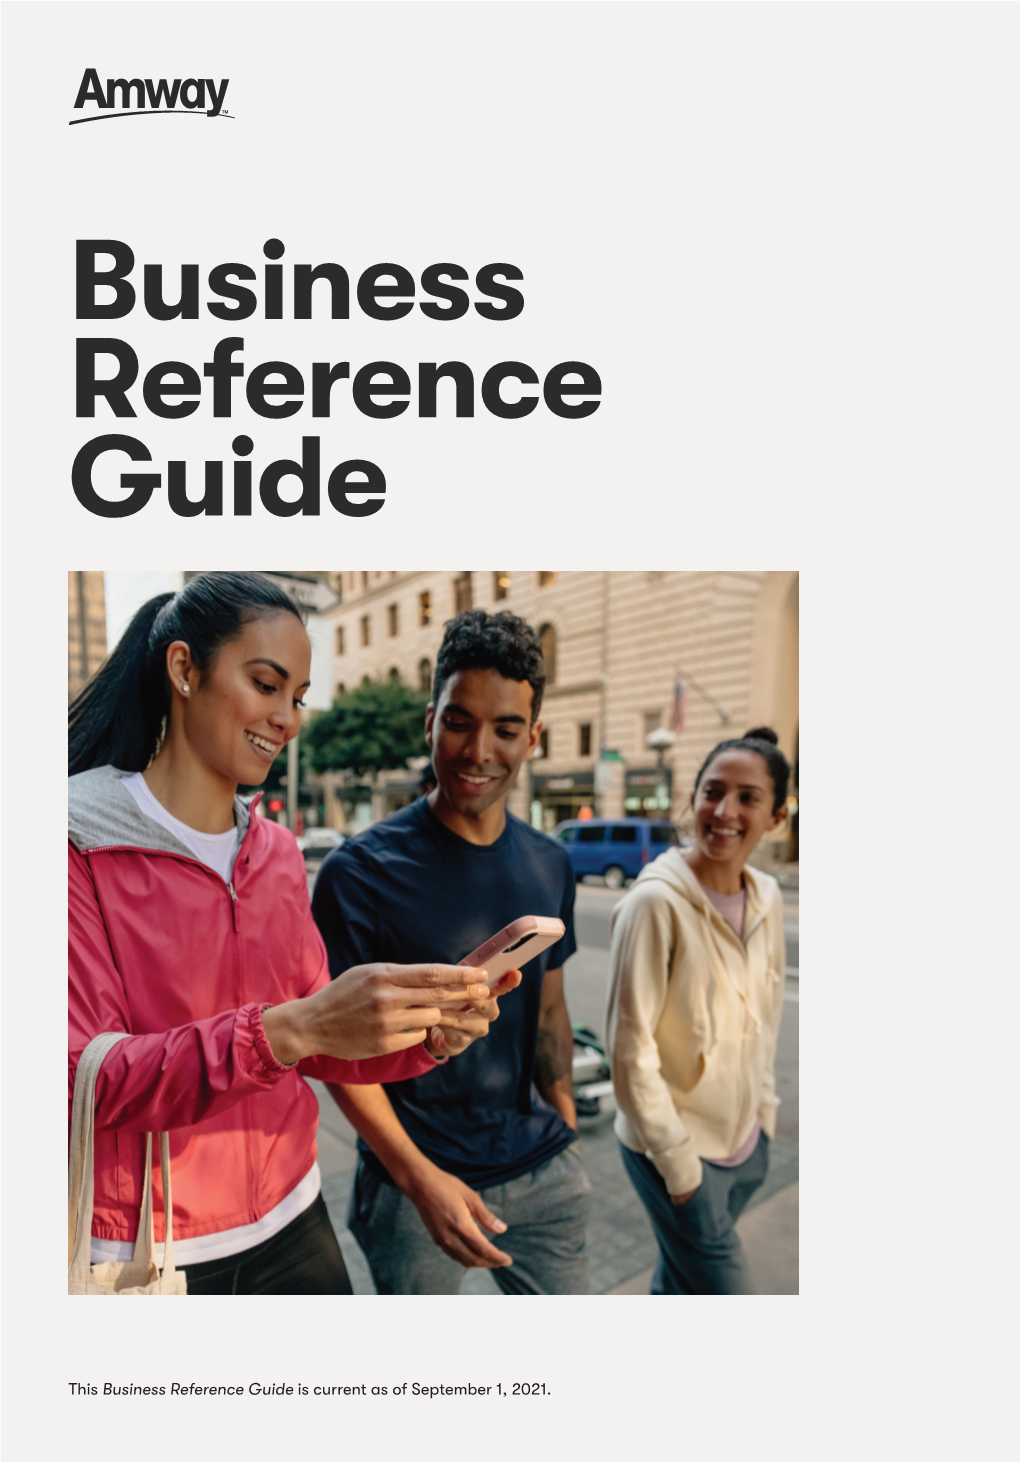 Read More Read More About Amway™ Business Reference Guide